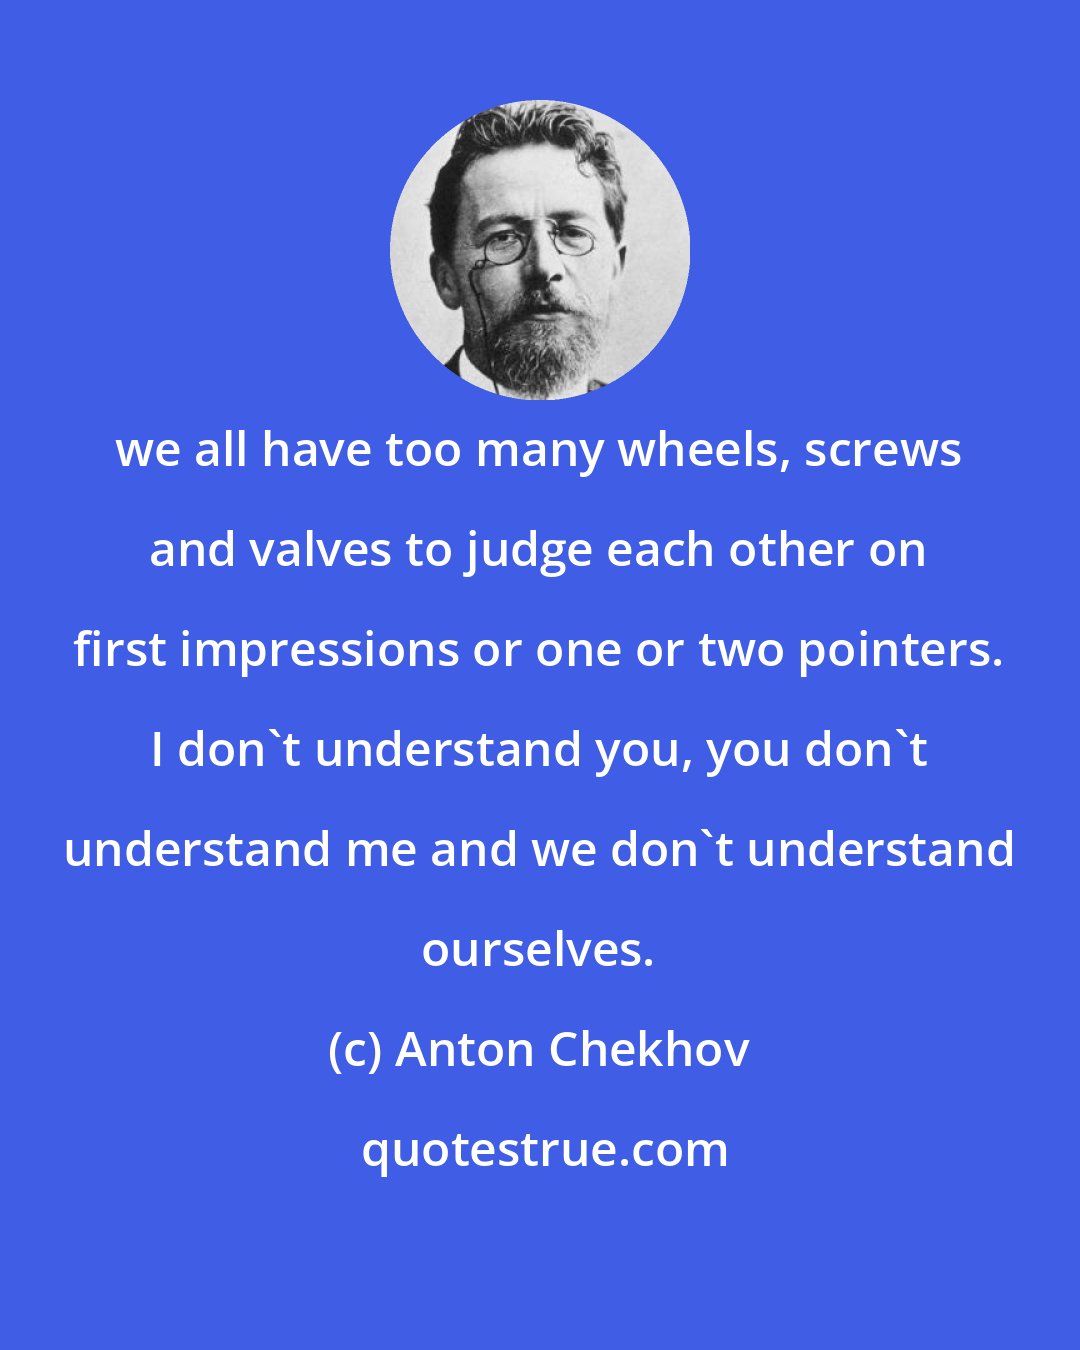 Anton Chekhov: we all have too many wheels, screws and valves to judge each other on first impressions or one or two pointers. I don't understand you, you don't understand me and we don't understand ourselves.